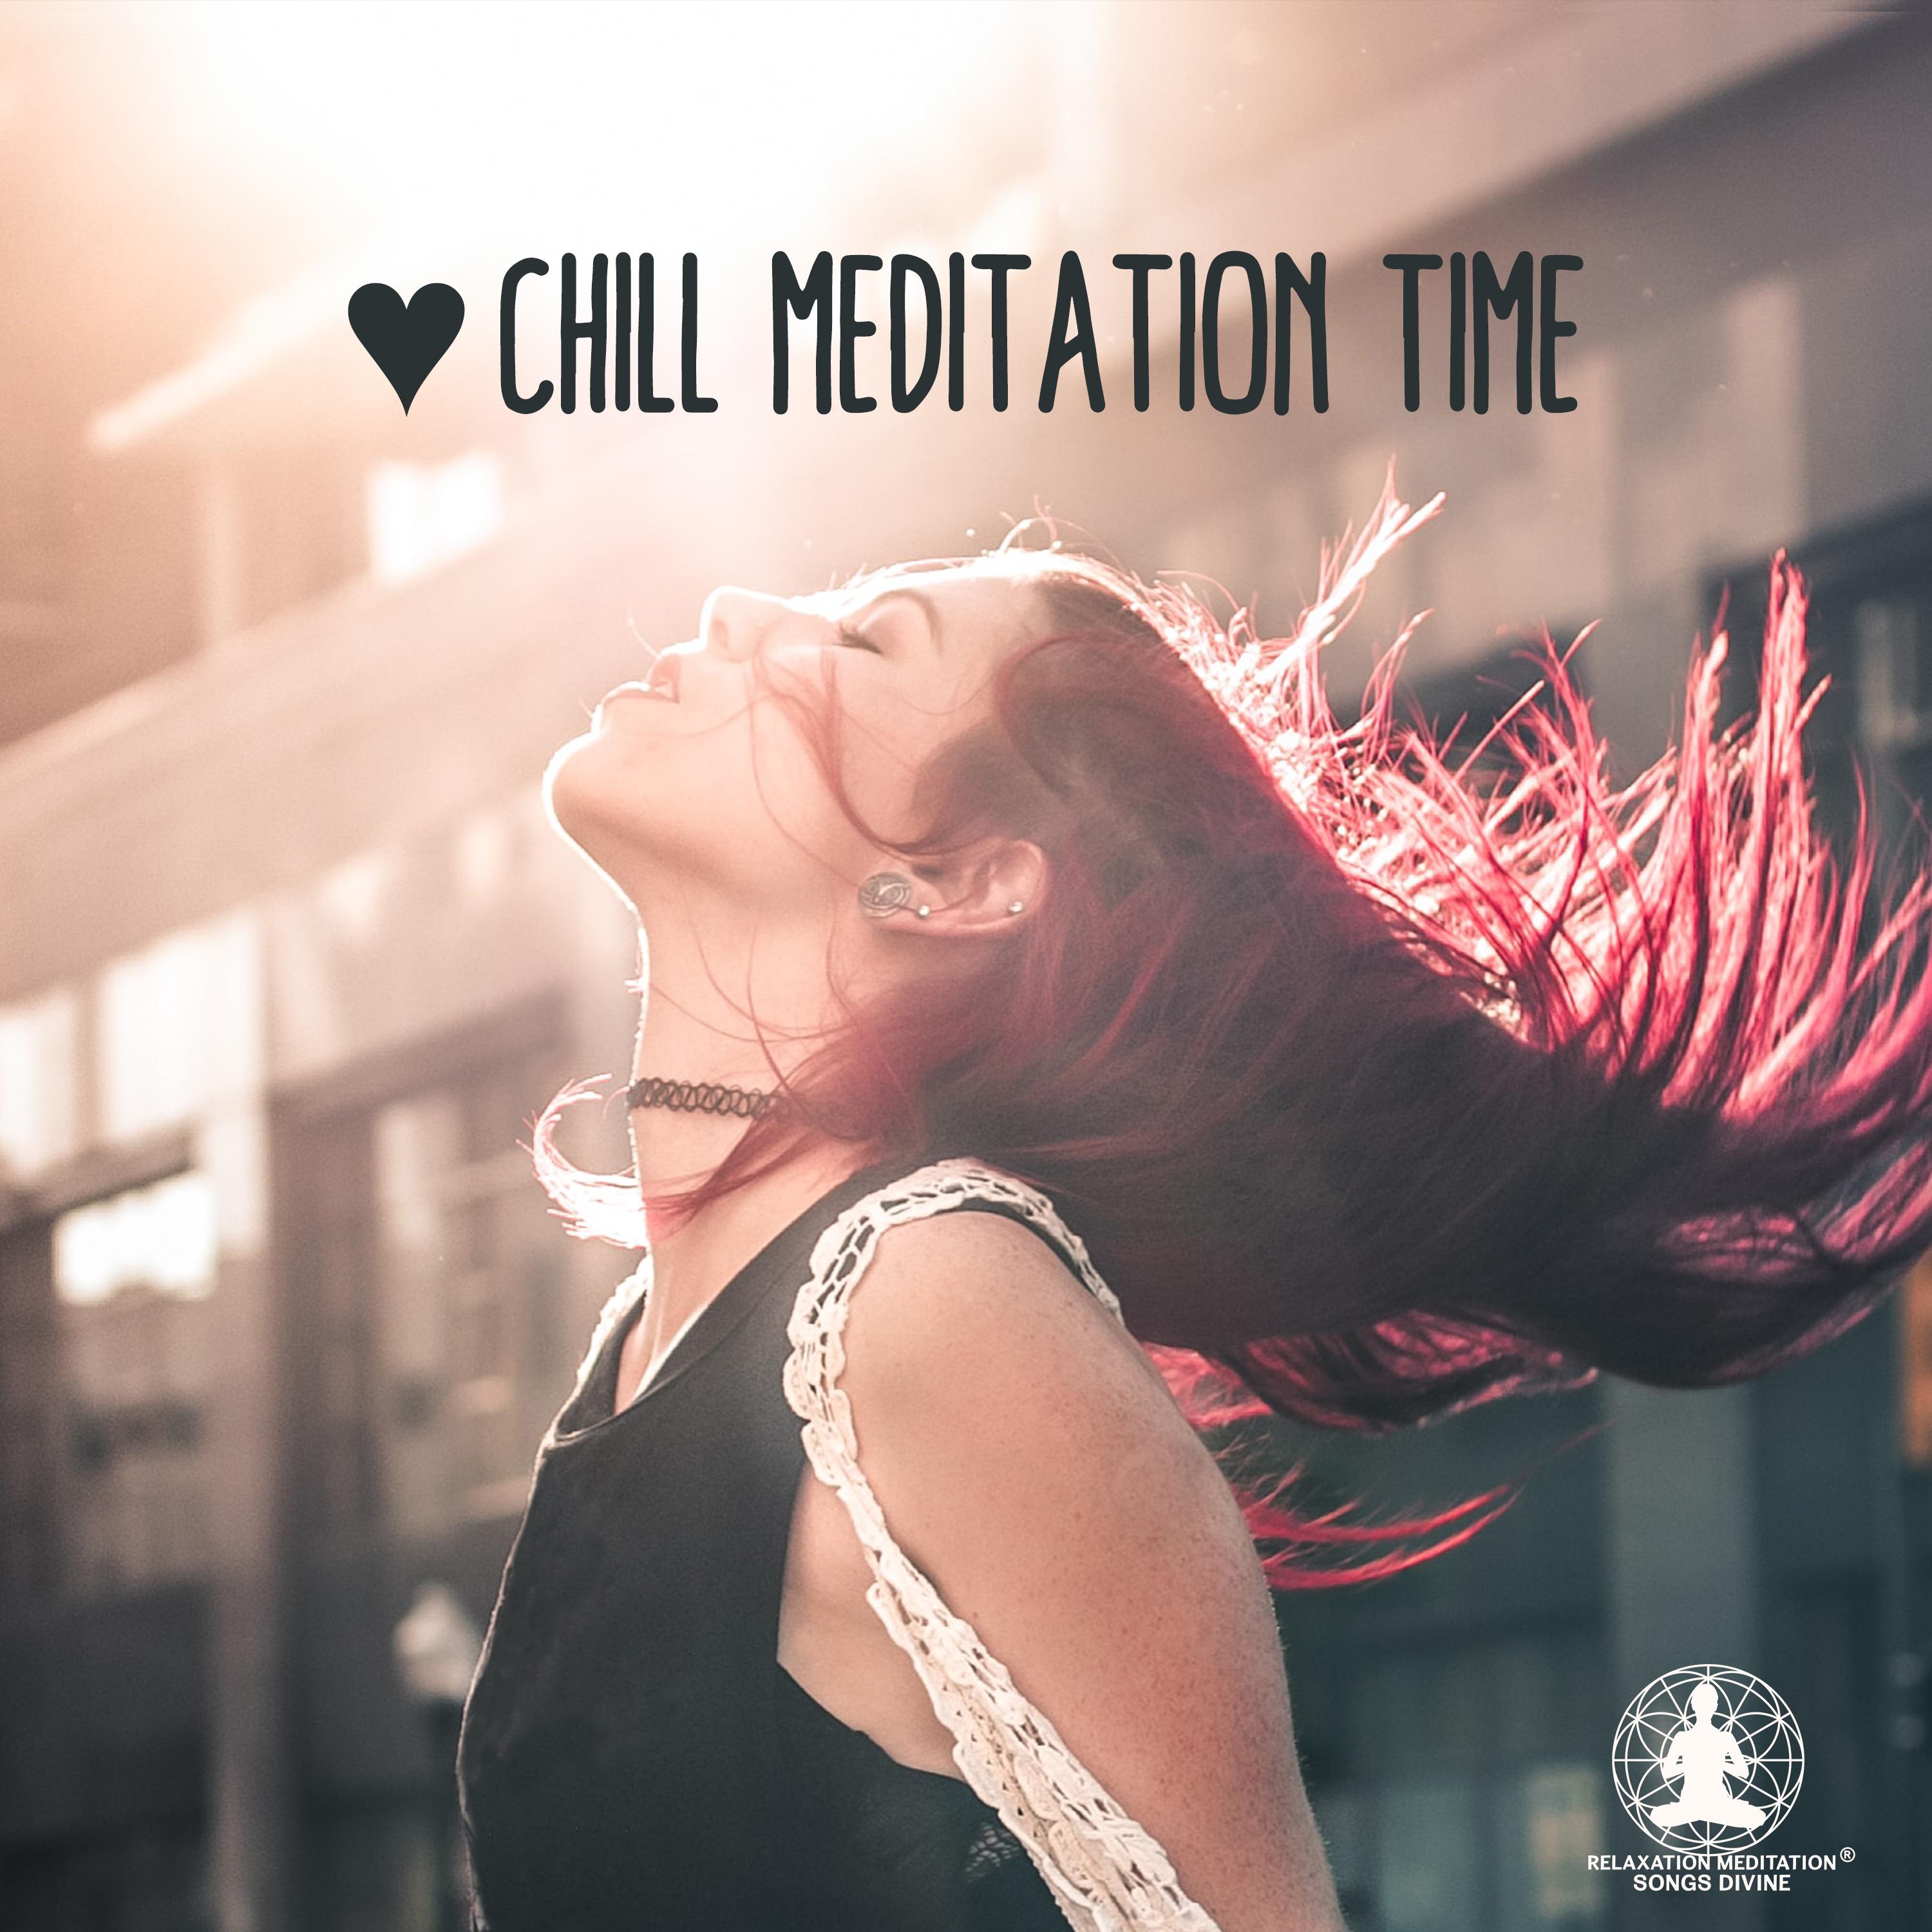 Chill Meditation Time Total Spiritual, Body  Mind Relax